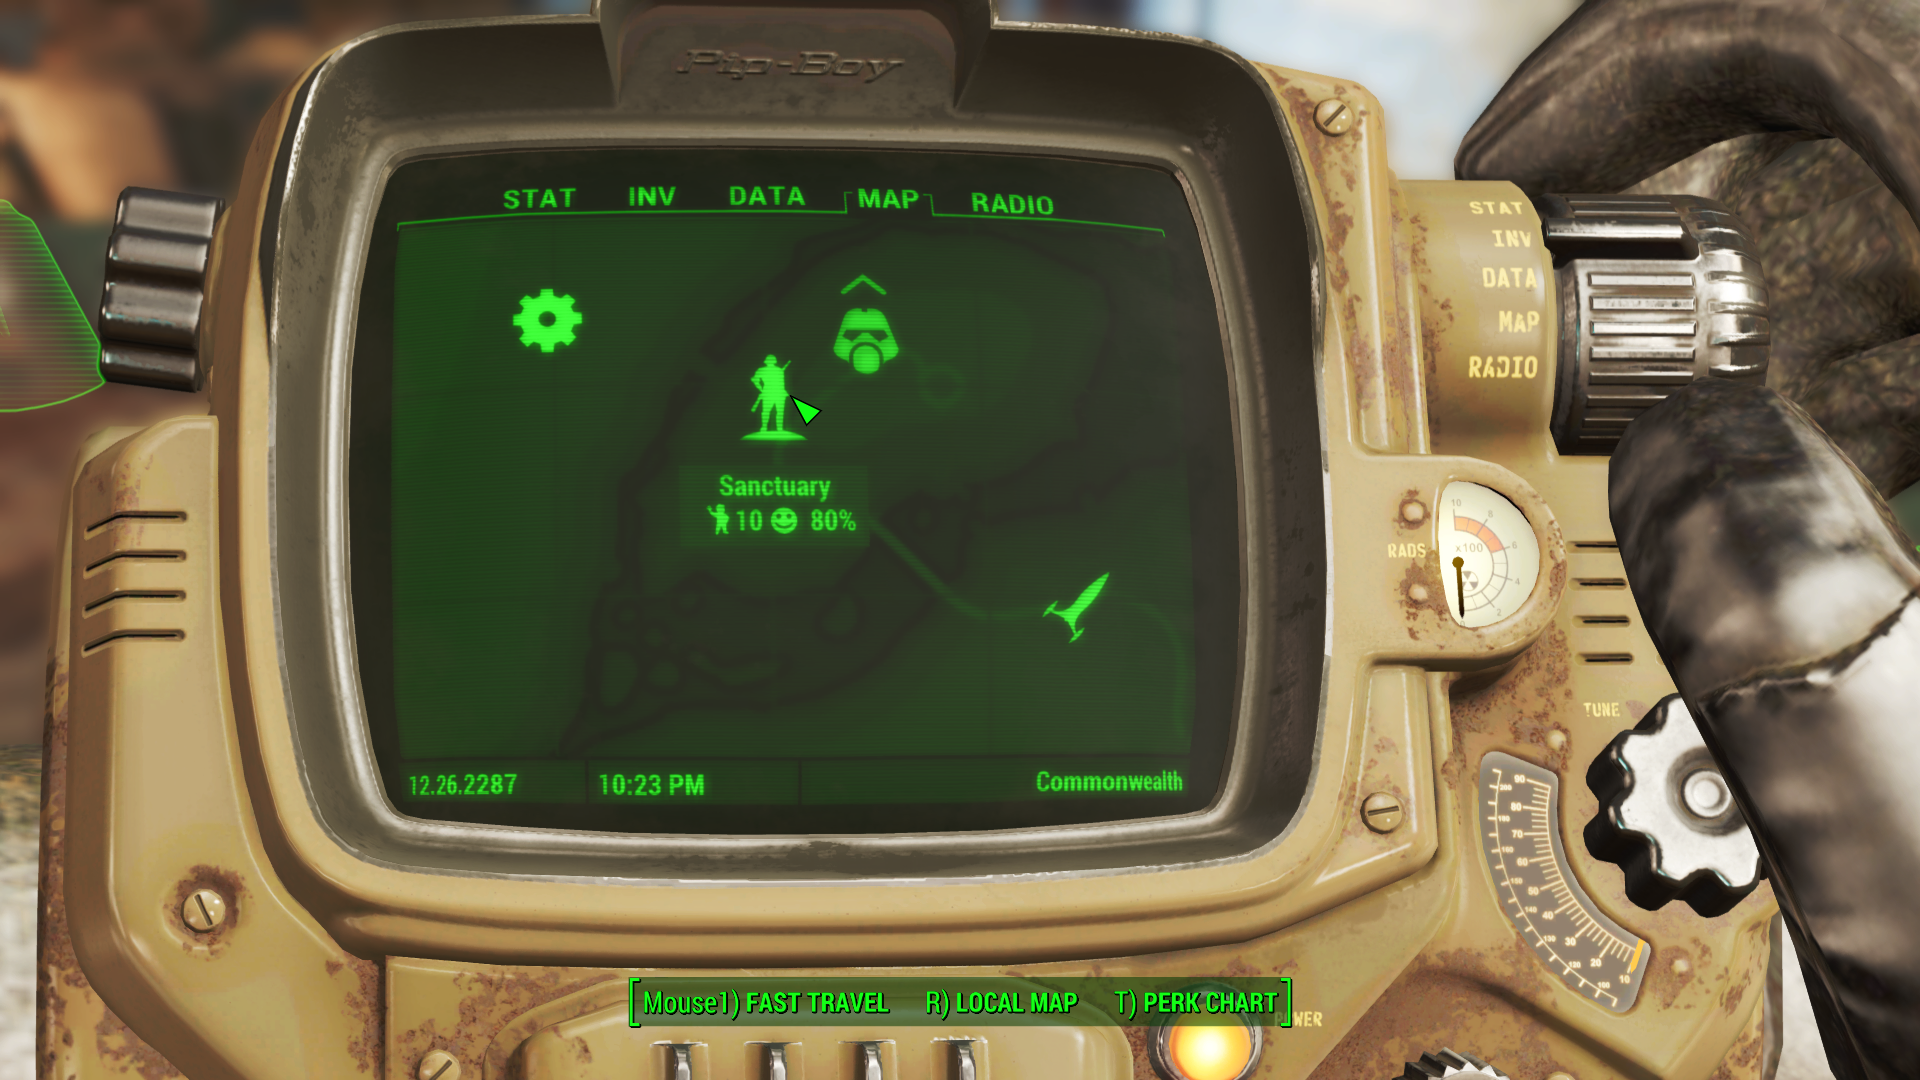 Gallery of Fallout 4 Combat Zone Strip Armour.